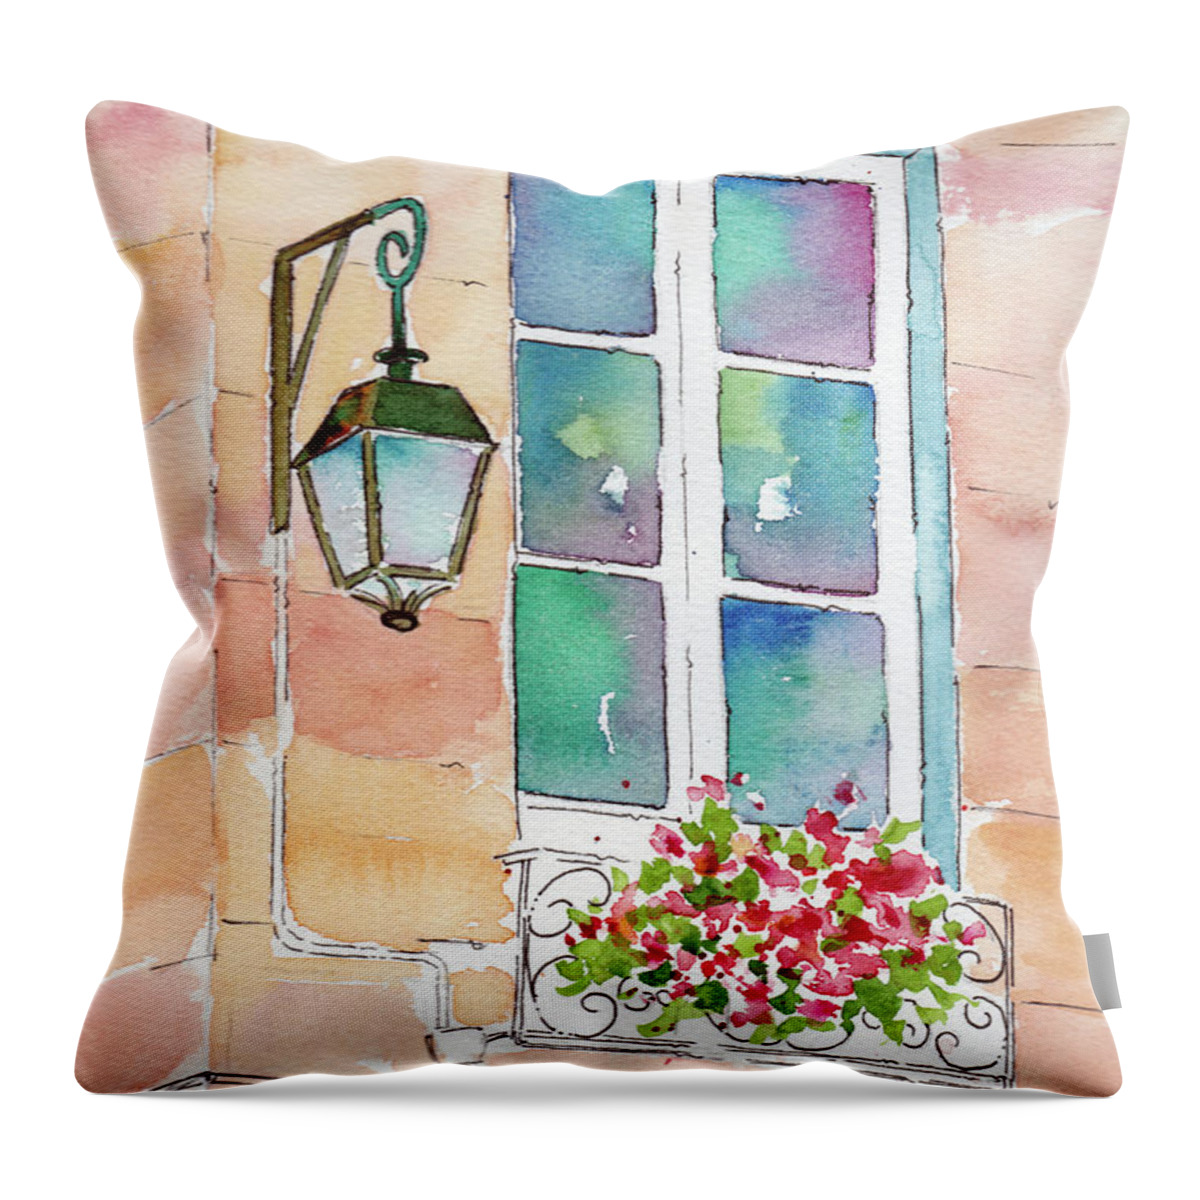 Impressionism Throw Pillow featuring the painting Paris Lamp And Balcony Window by Pat Katz